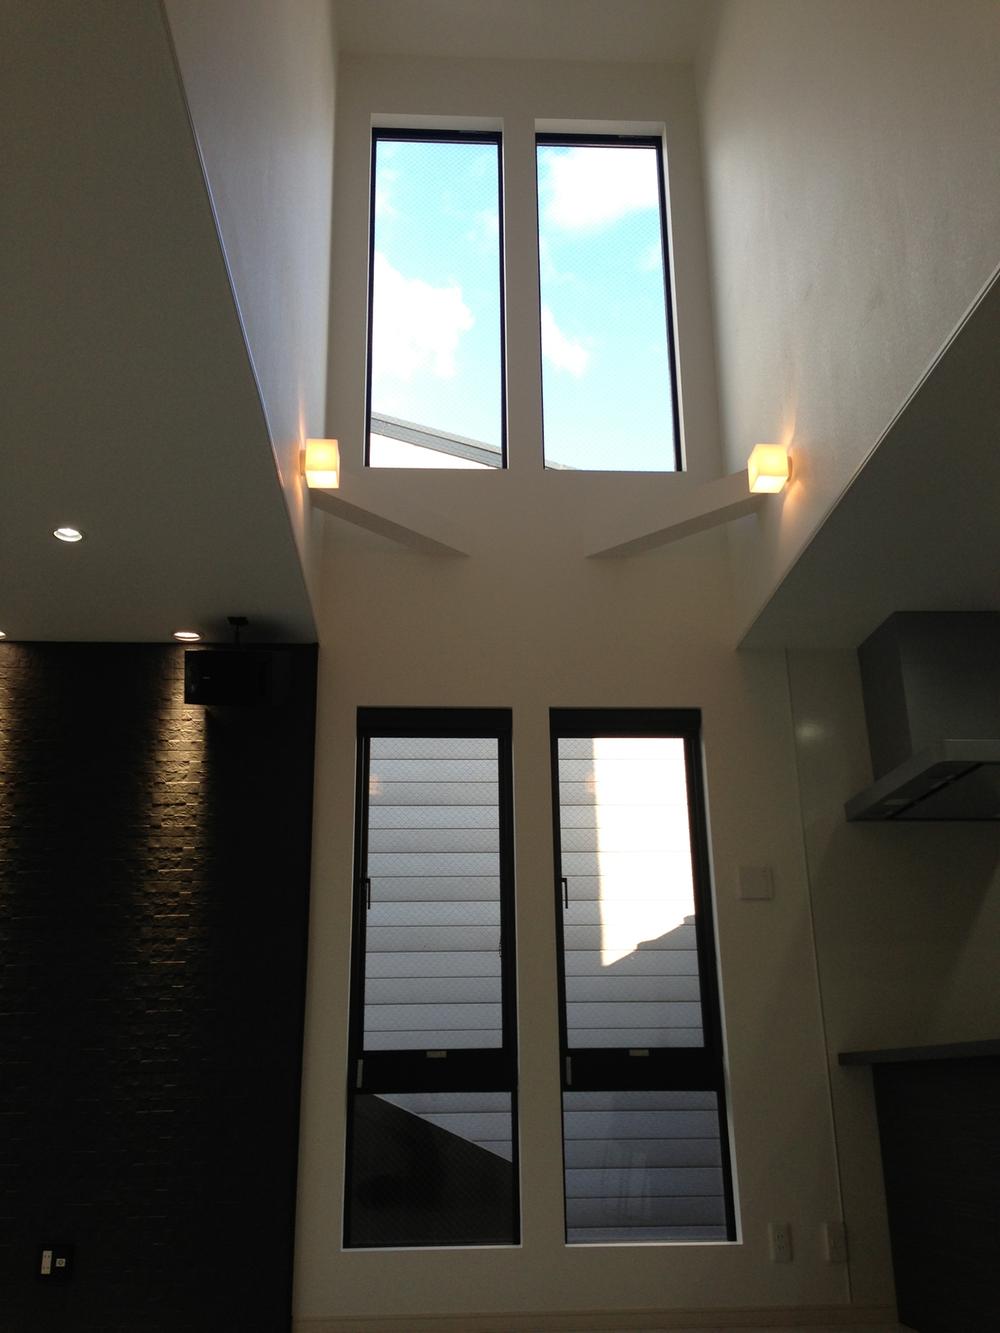 Living. Atrium part, With wide FIX, It is bright even in daytime lighting without